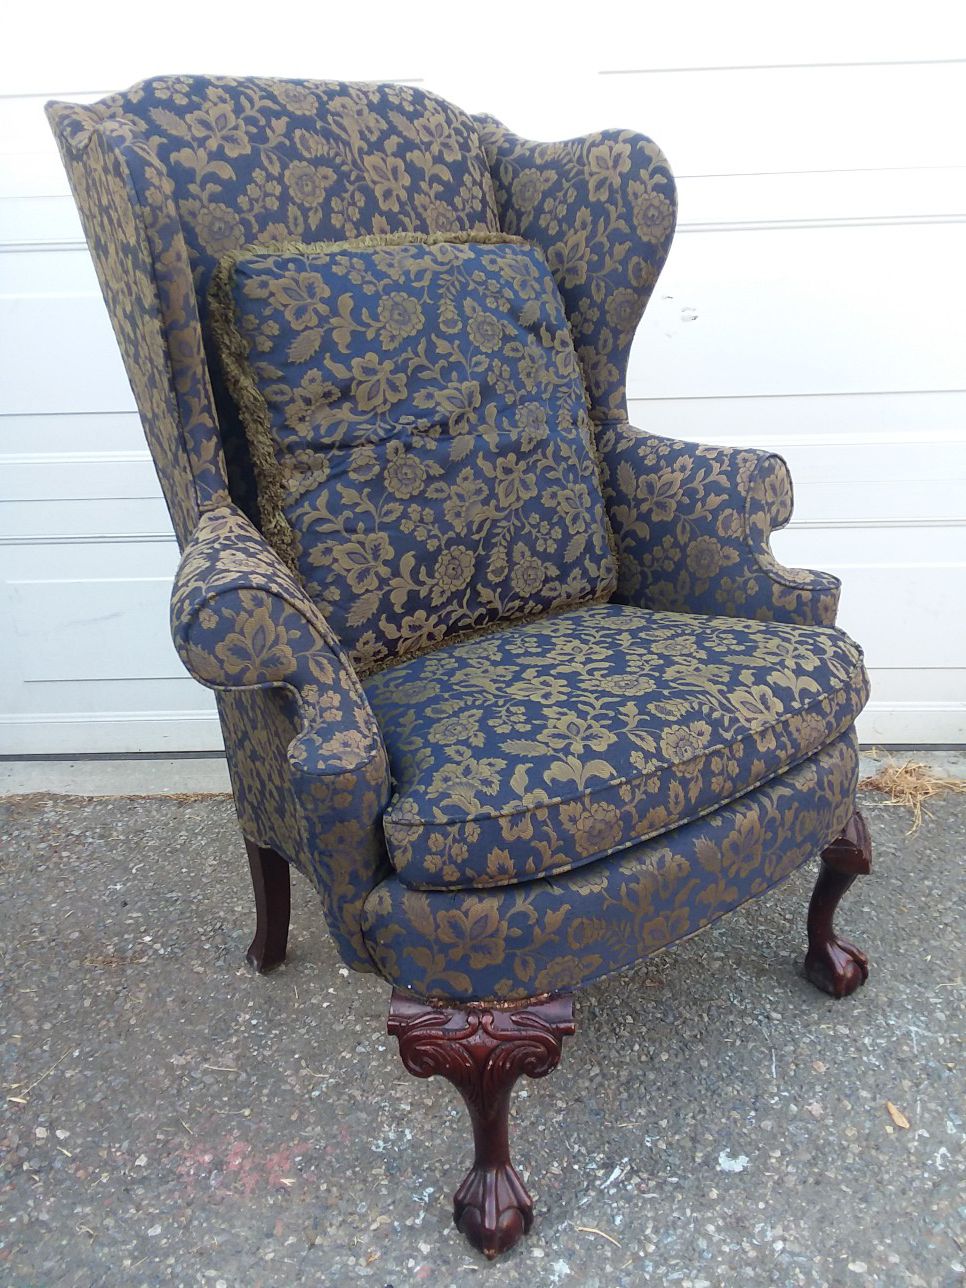 Wingback chair with claw feet by Thomasville